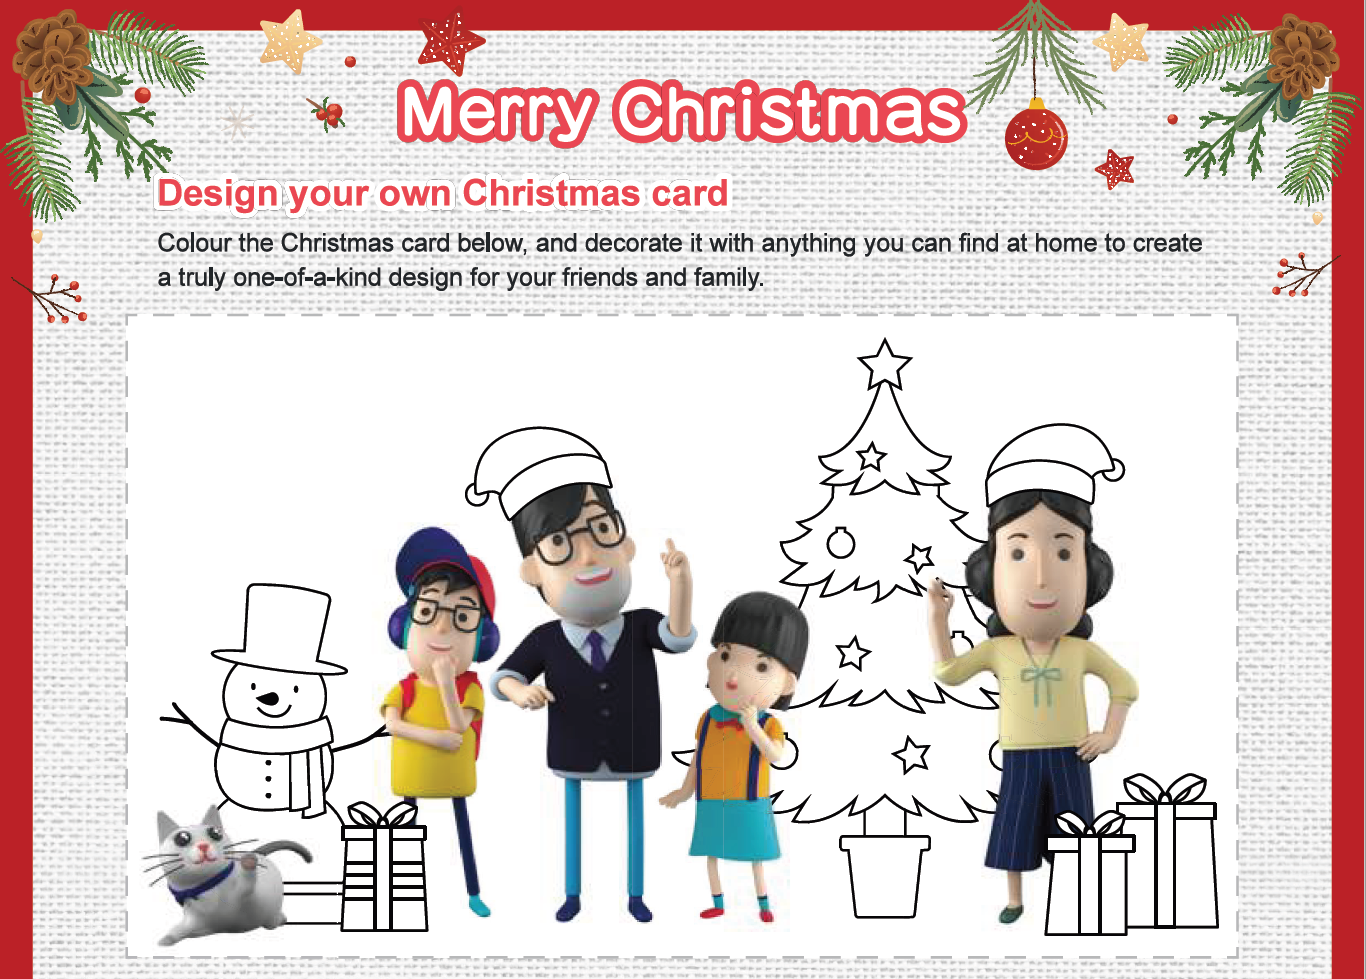 Design your own Christmas card [Aged 6-11]